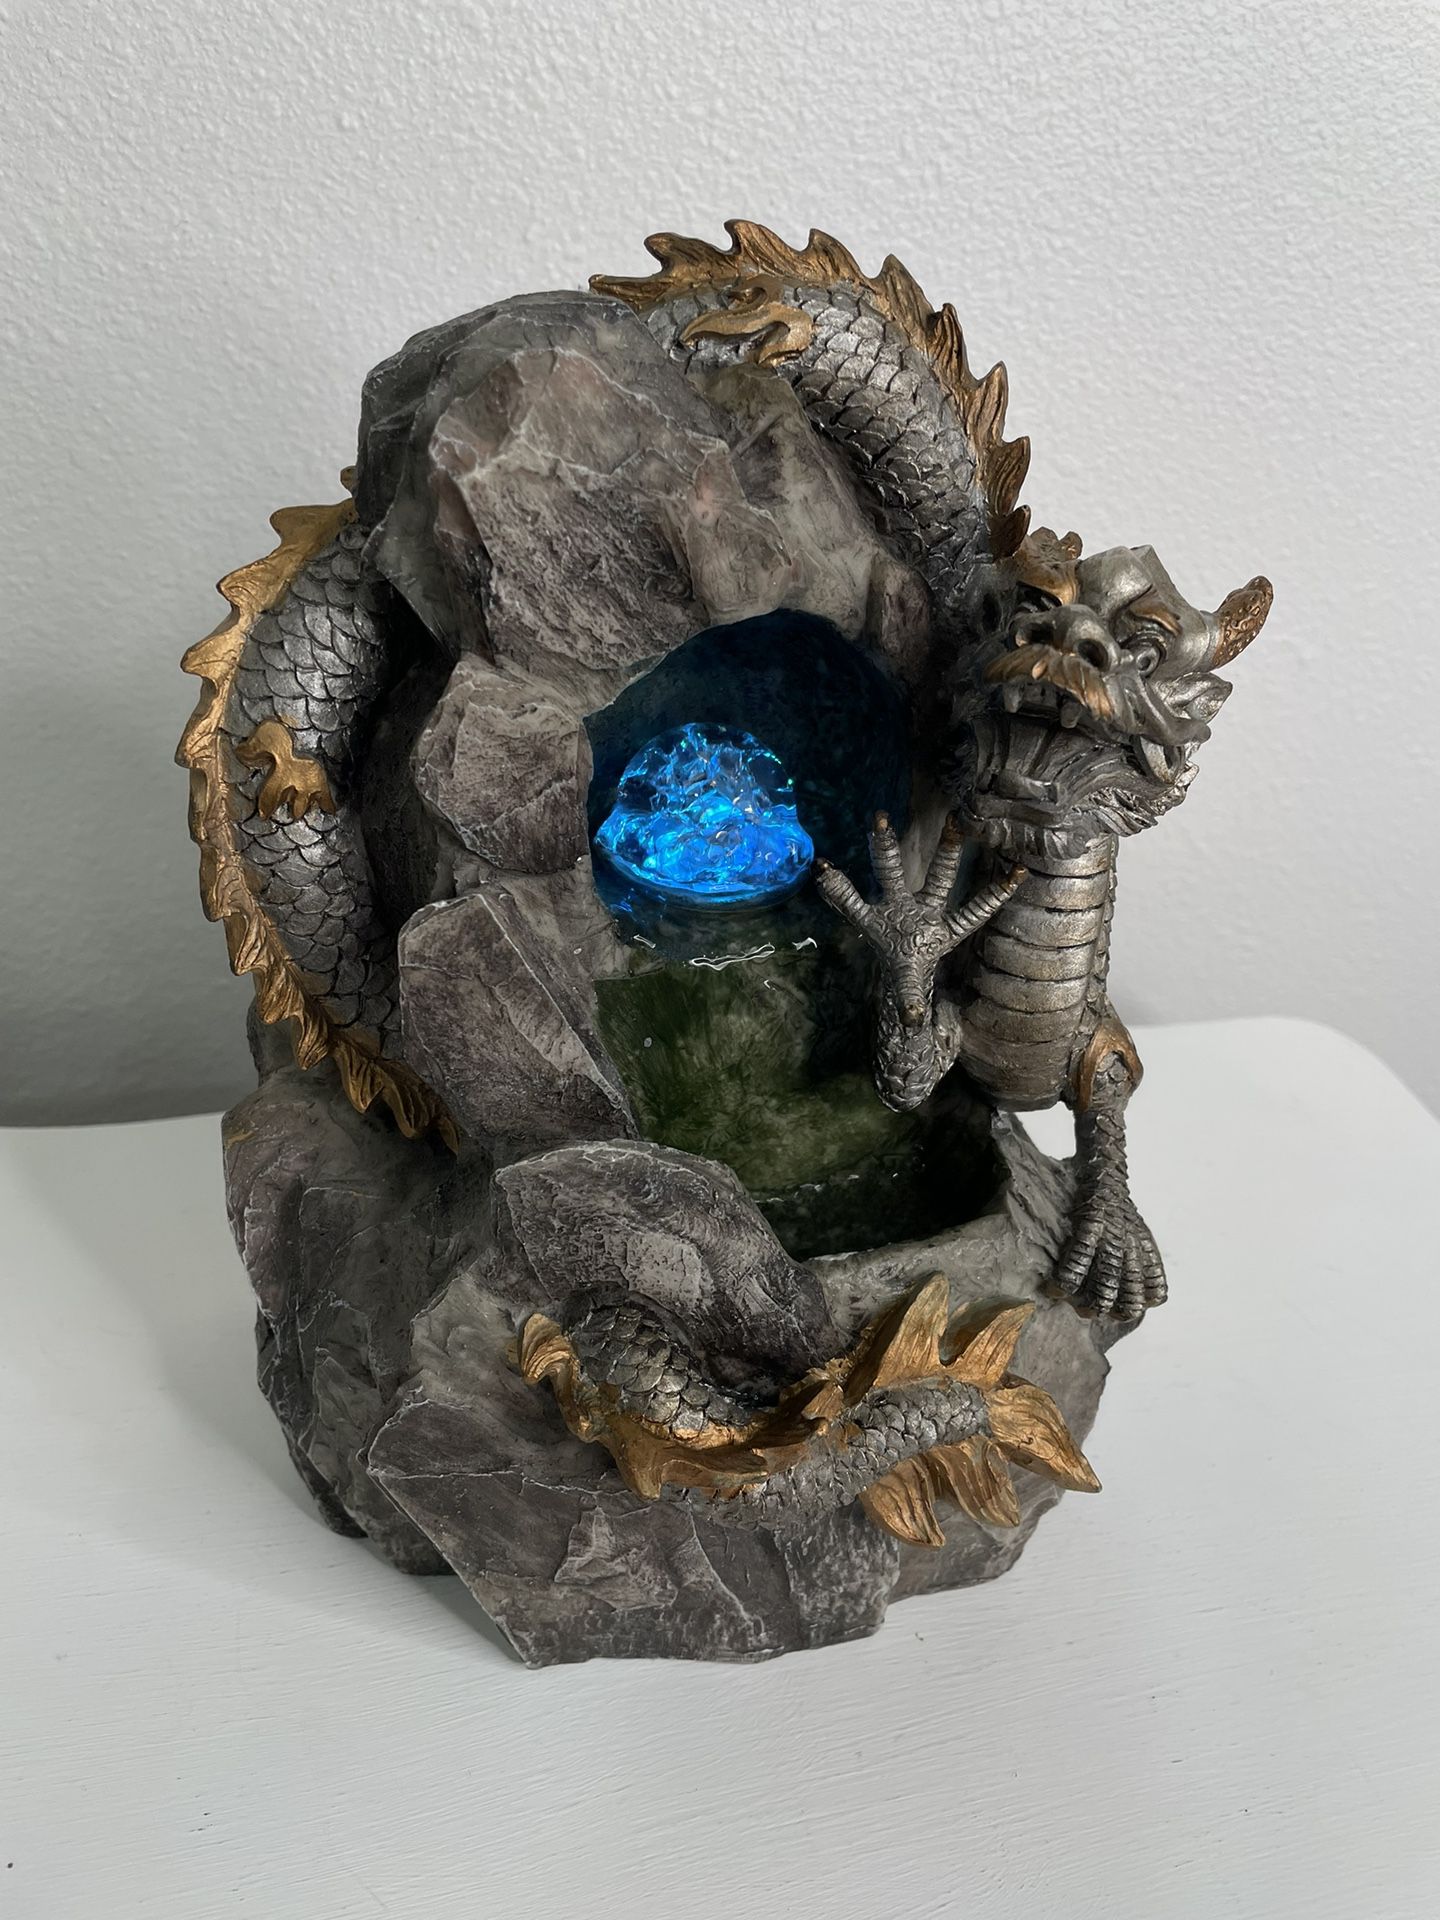 Small Silver/Gold Dragon Rock Cave  Crystal Ball Water Fountain - Changes Colors - Kids Room Decor Home Decor 